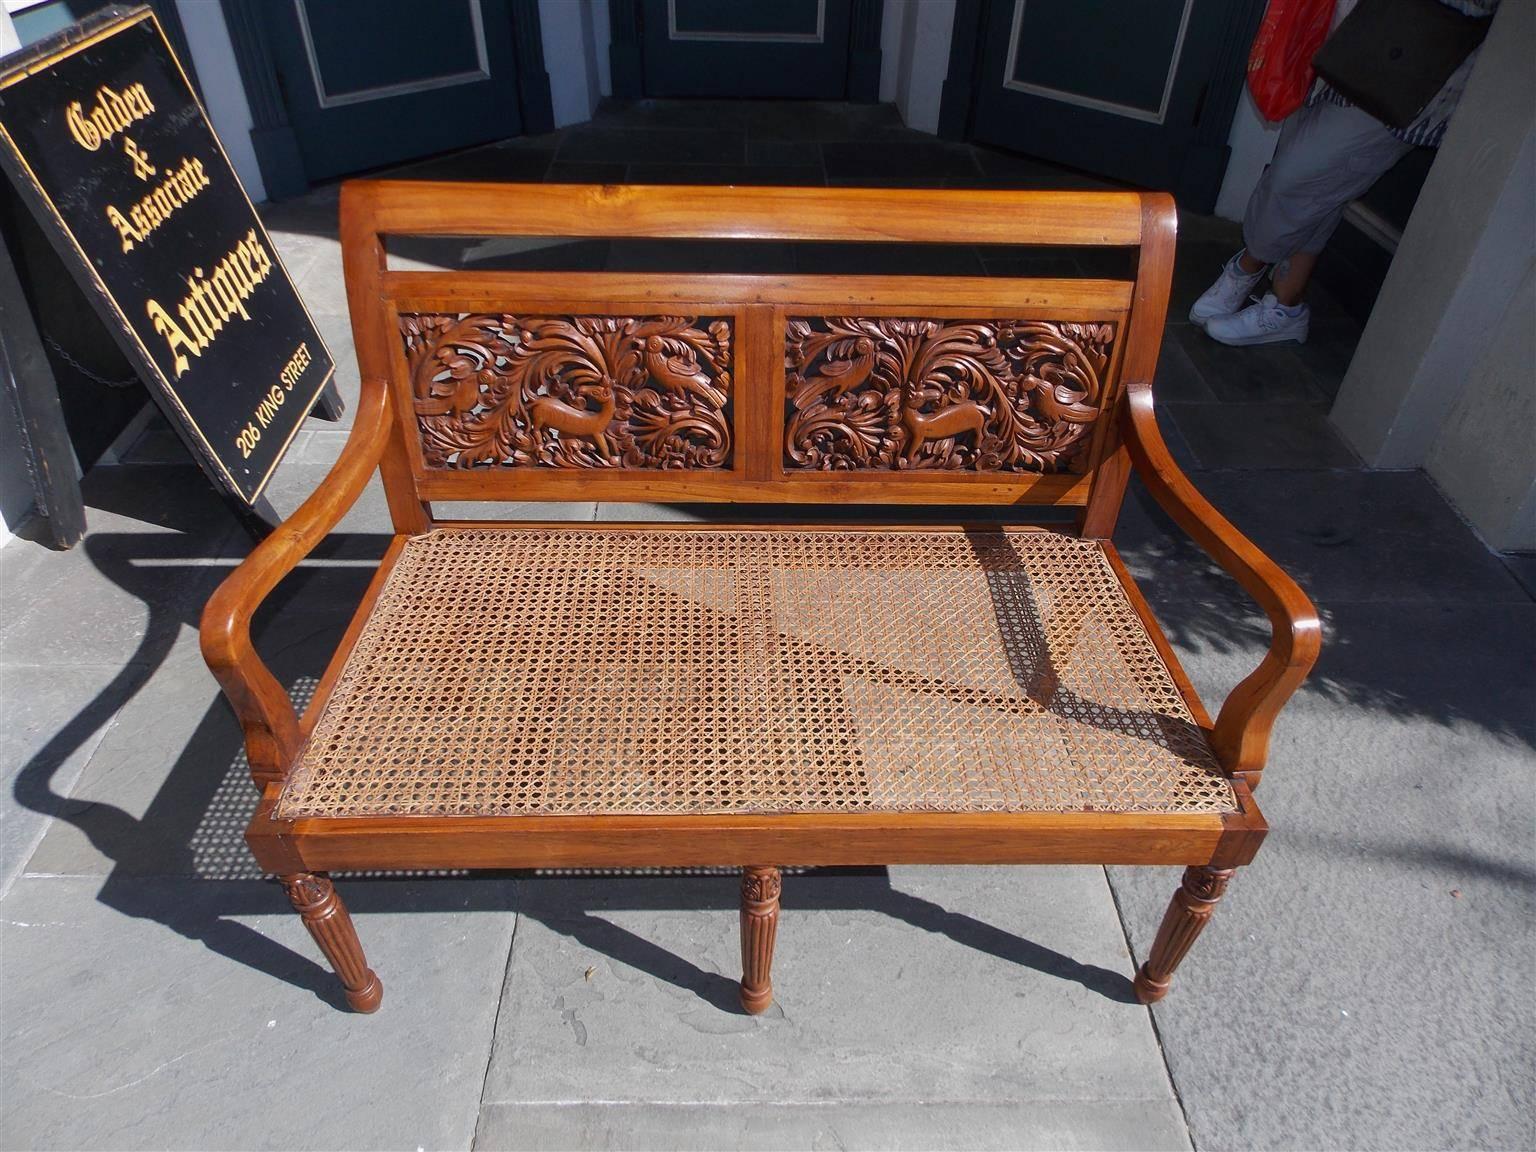 Caribbean kings wood settee with a scrolled back, flanking panels with carved foliage and animal motif, original cane seat and terminating on turned bulbous reeded ringed legs. Early 19th Century.
Seat depth is 21.5